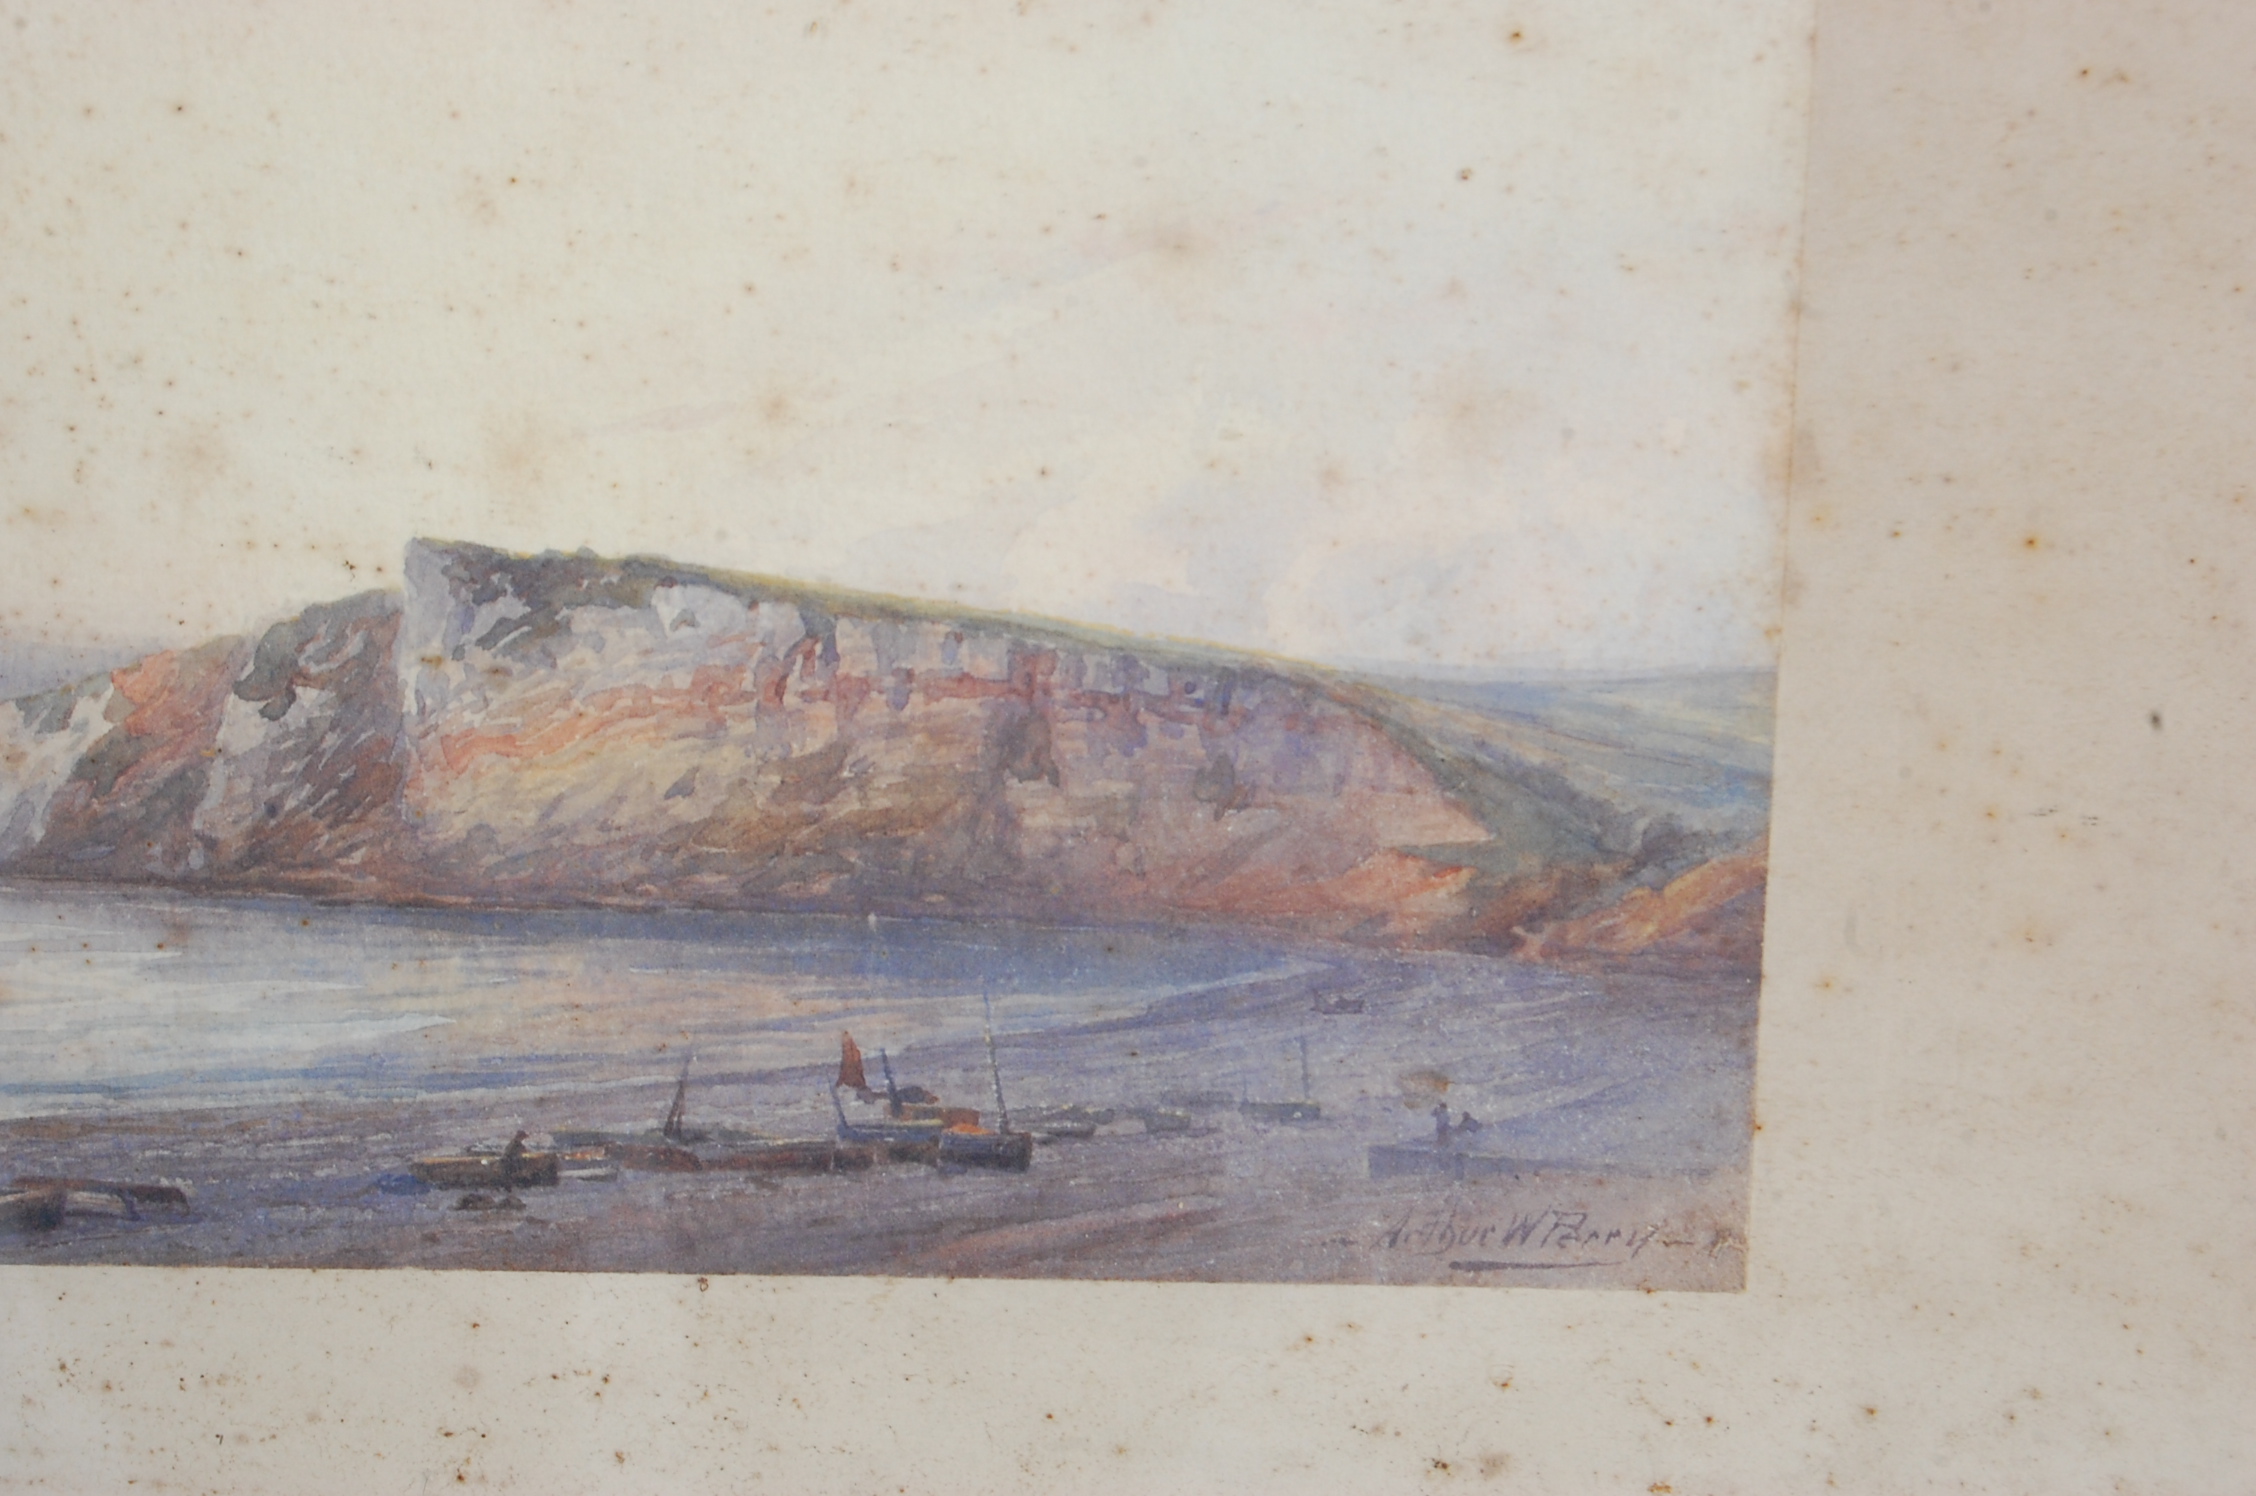 DEVON BAY AND CLIFF PAINTING BY ARTHUR W PERRY - Image 3 of 6